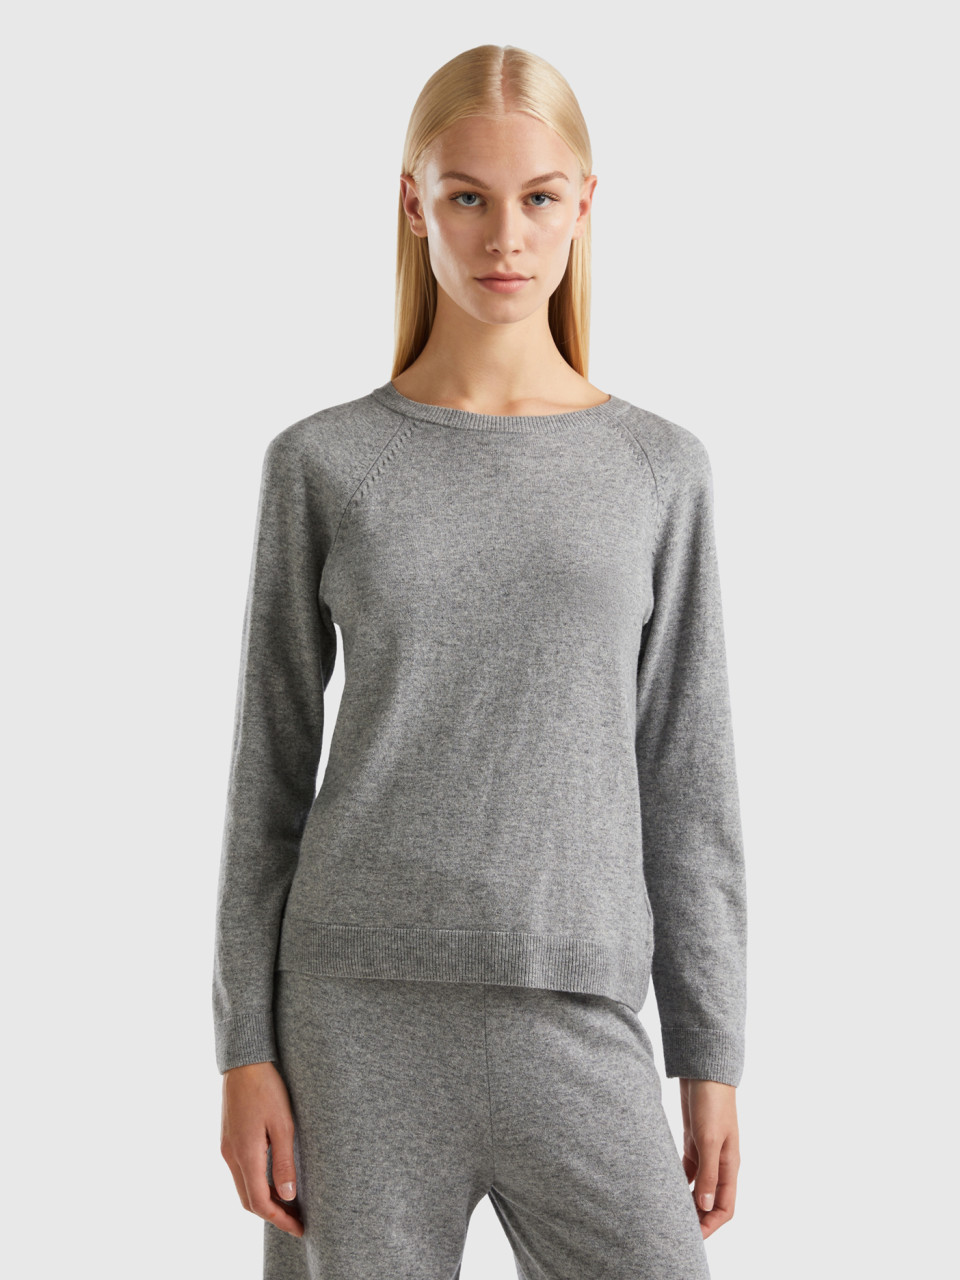 Benetton, Gray Crew Neck Sweater In Cashmere And Wool Blend, Light Gray, Women